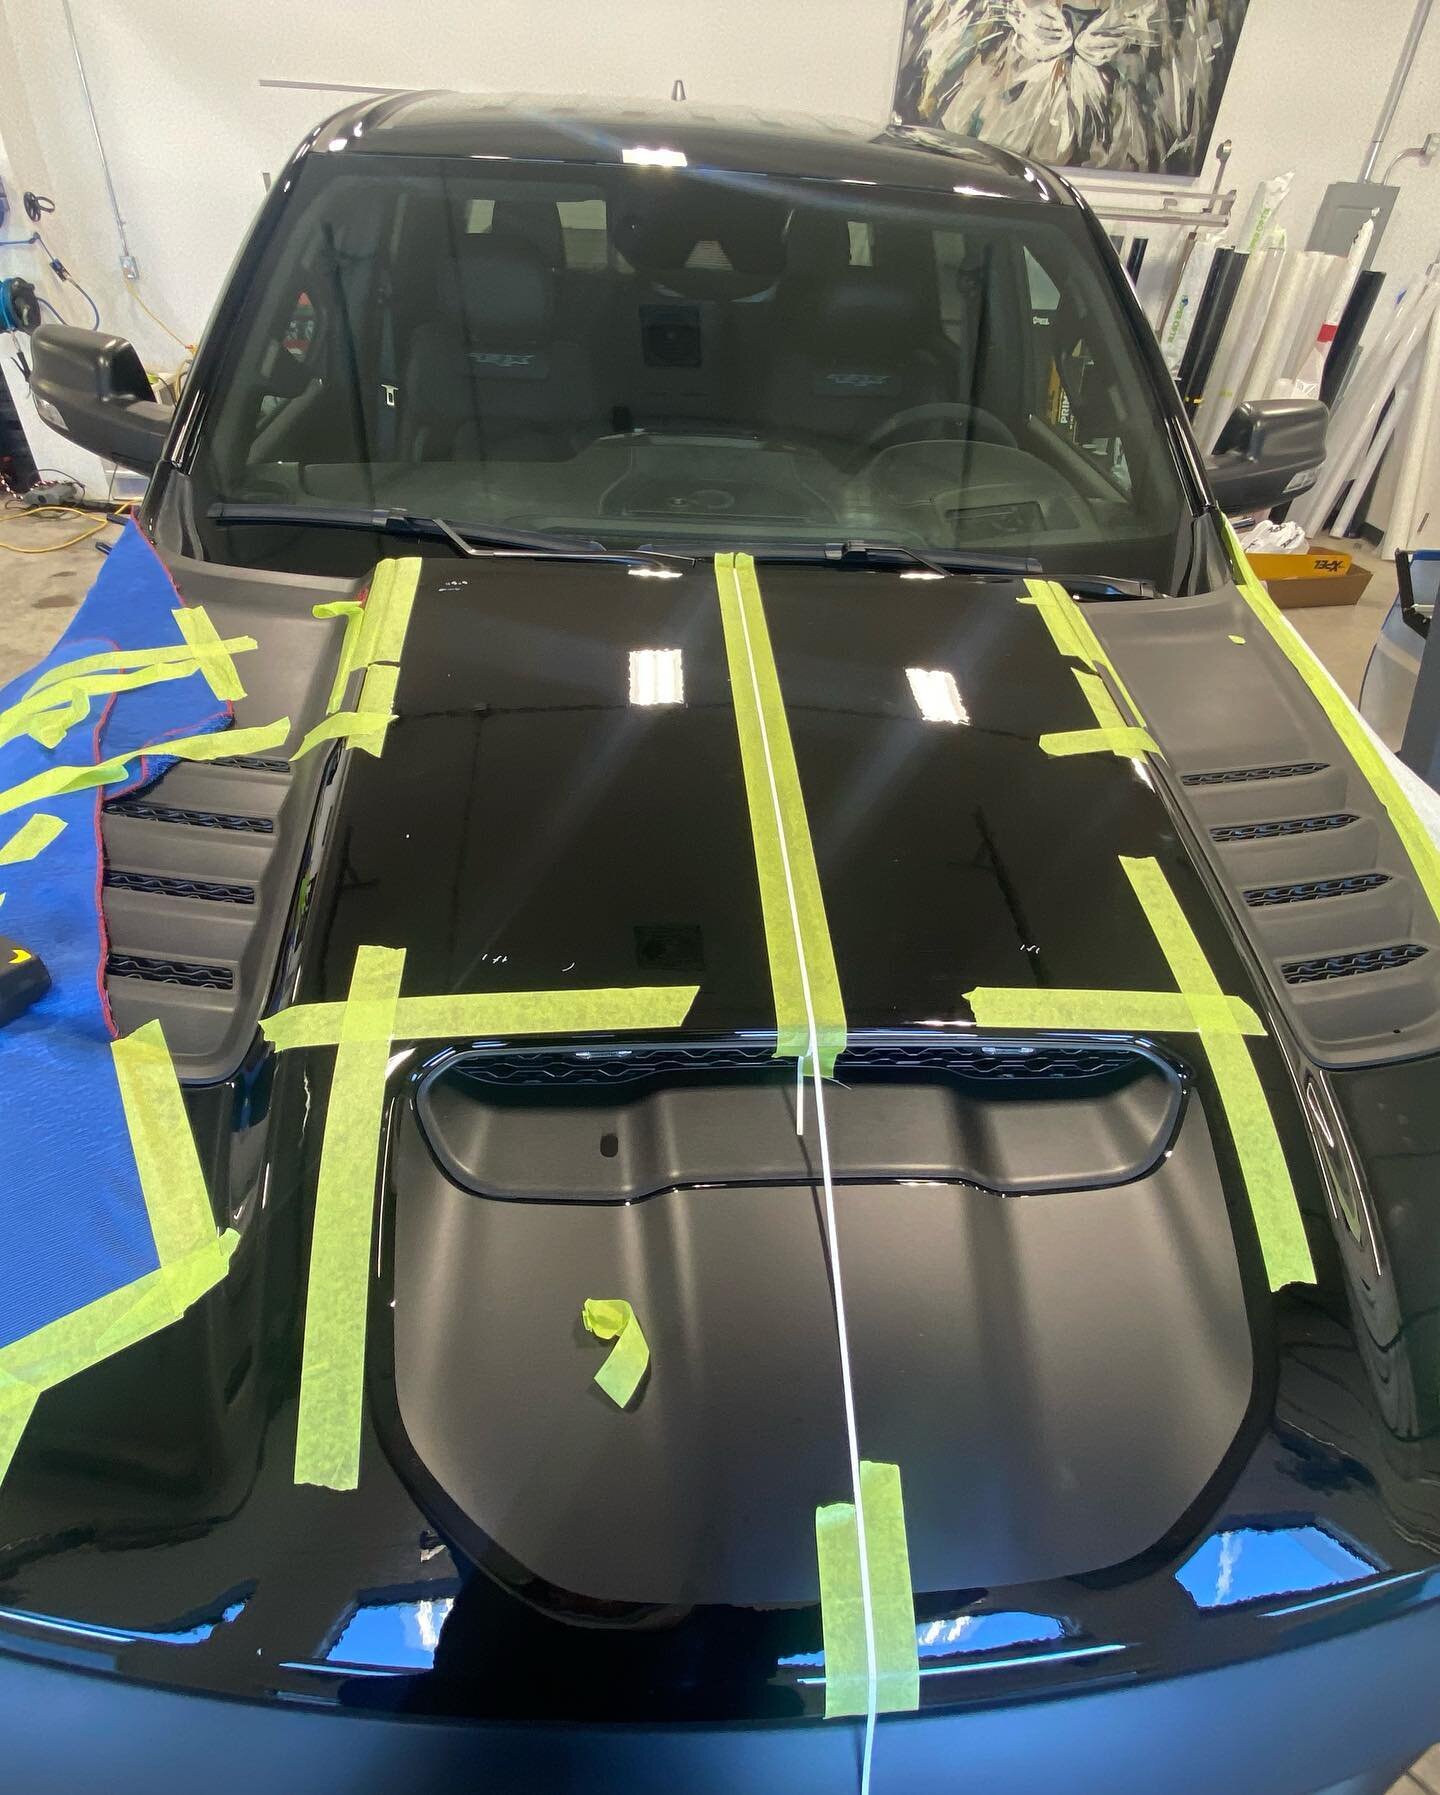 (Swipe for progress picture) Measure once and cut twice right? 🤣 3M Matte Black getting laid down for something special. Stay tuned for more uploads. #3mcanada #3m #3mfilms #dodge #ram #trx